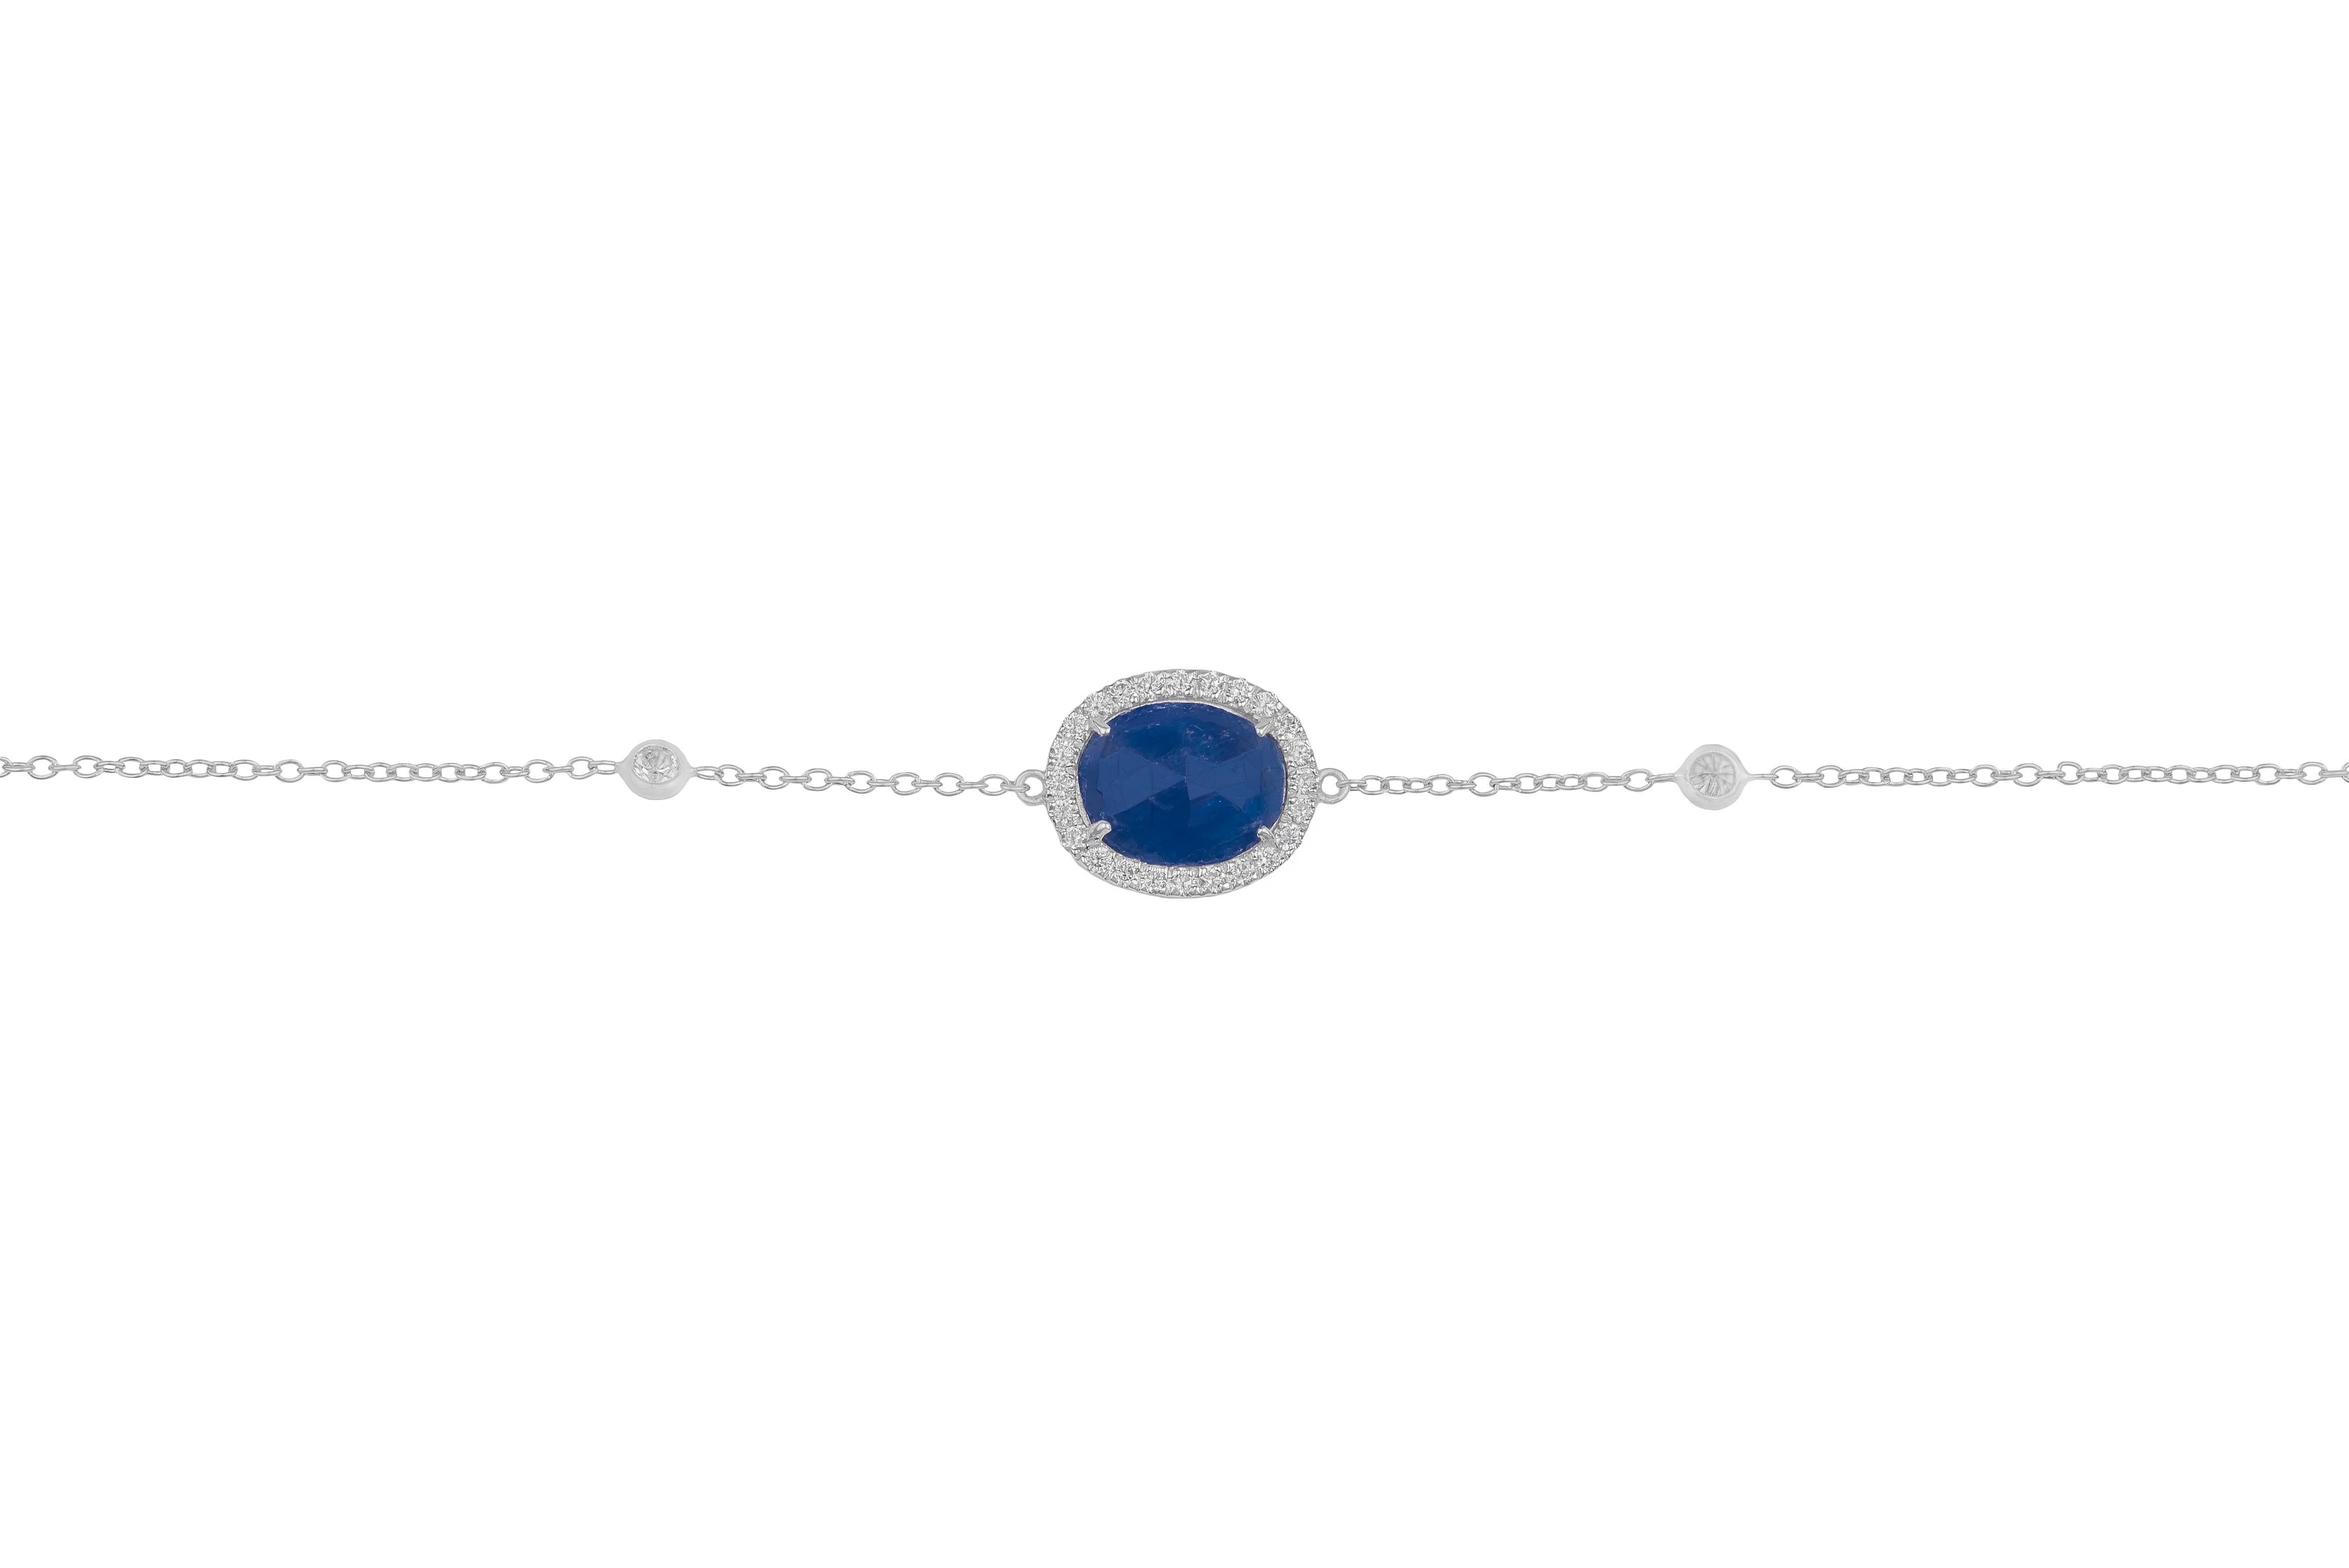 This 18k white gold bracelet with sapphire and white diamonds is made in Italy by Fanuele Gioielli.    
It features an oval cut sapphire surrounded by a row of brilliant cut white diamonds placed at the centre, plus two brilliant cut diamonds in a